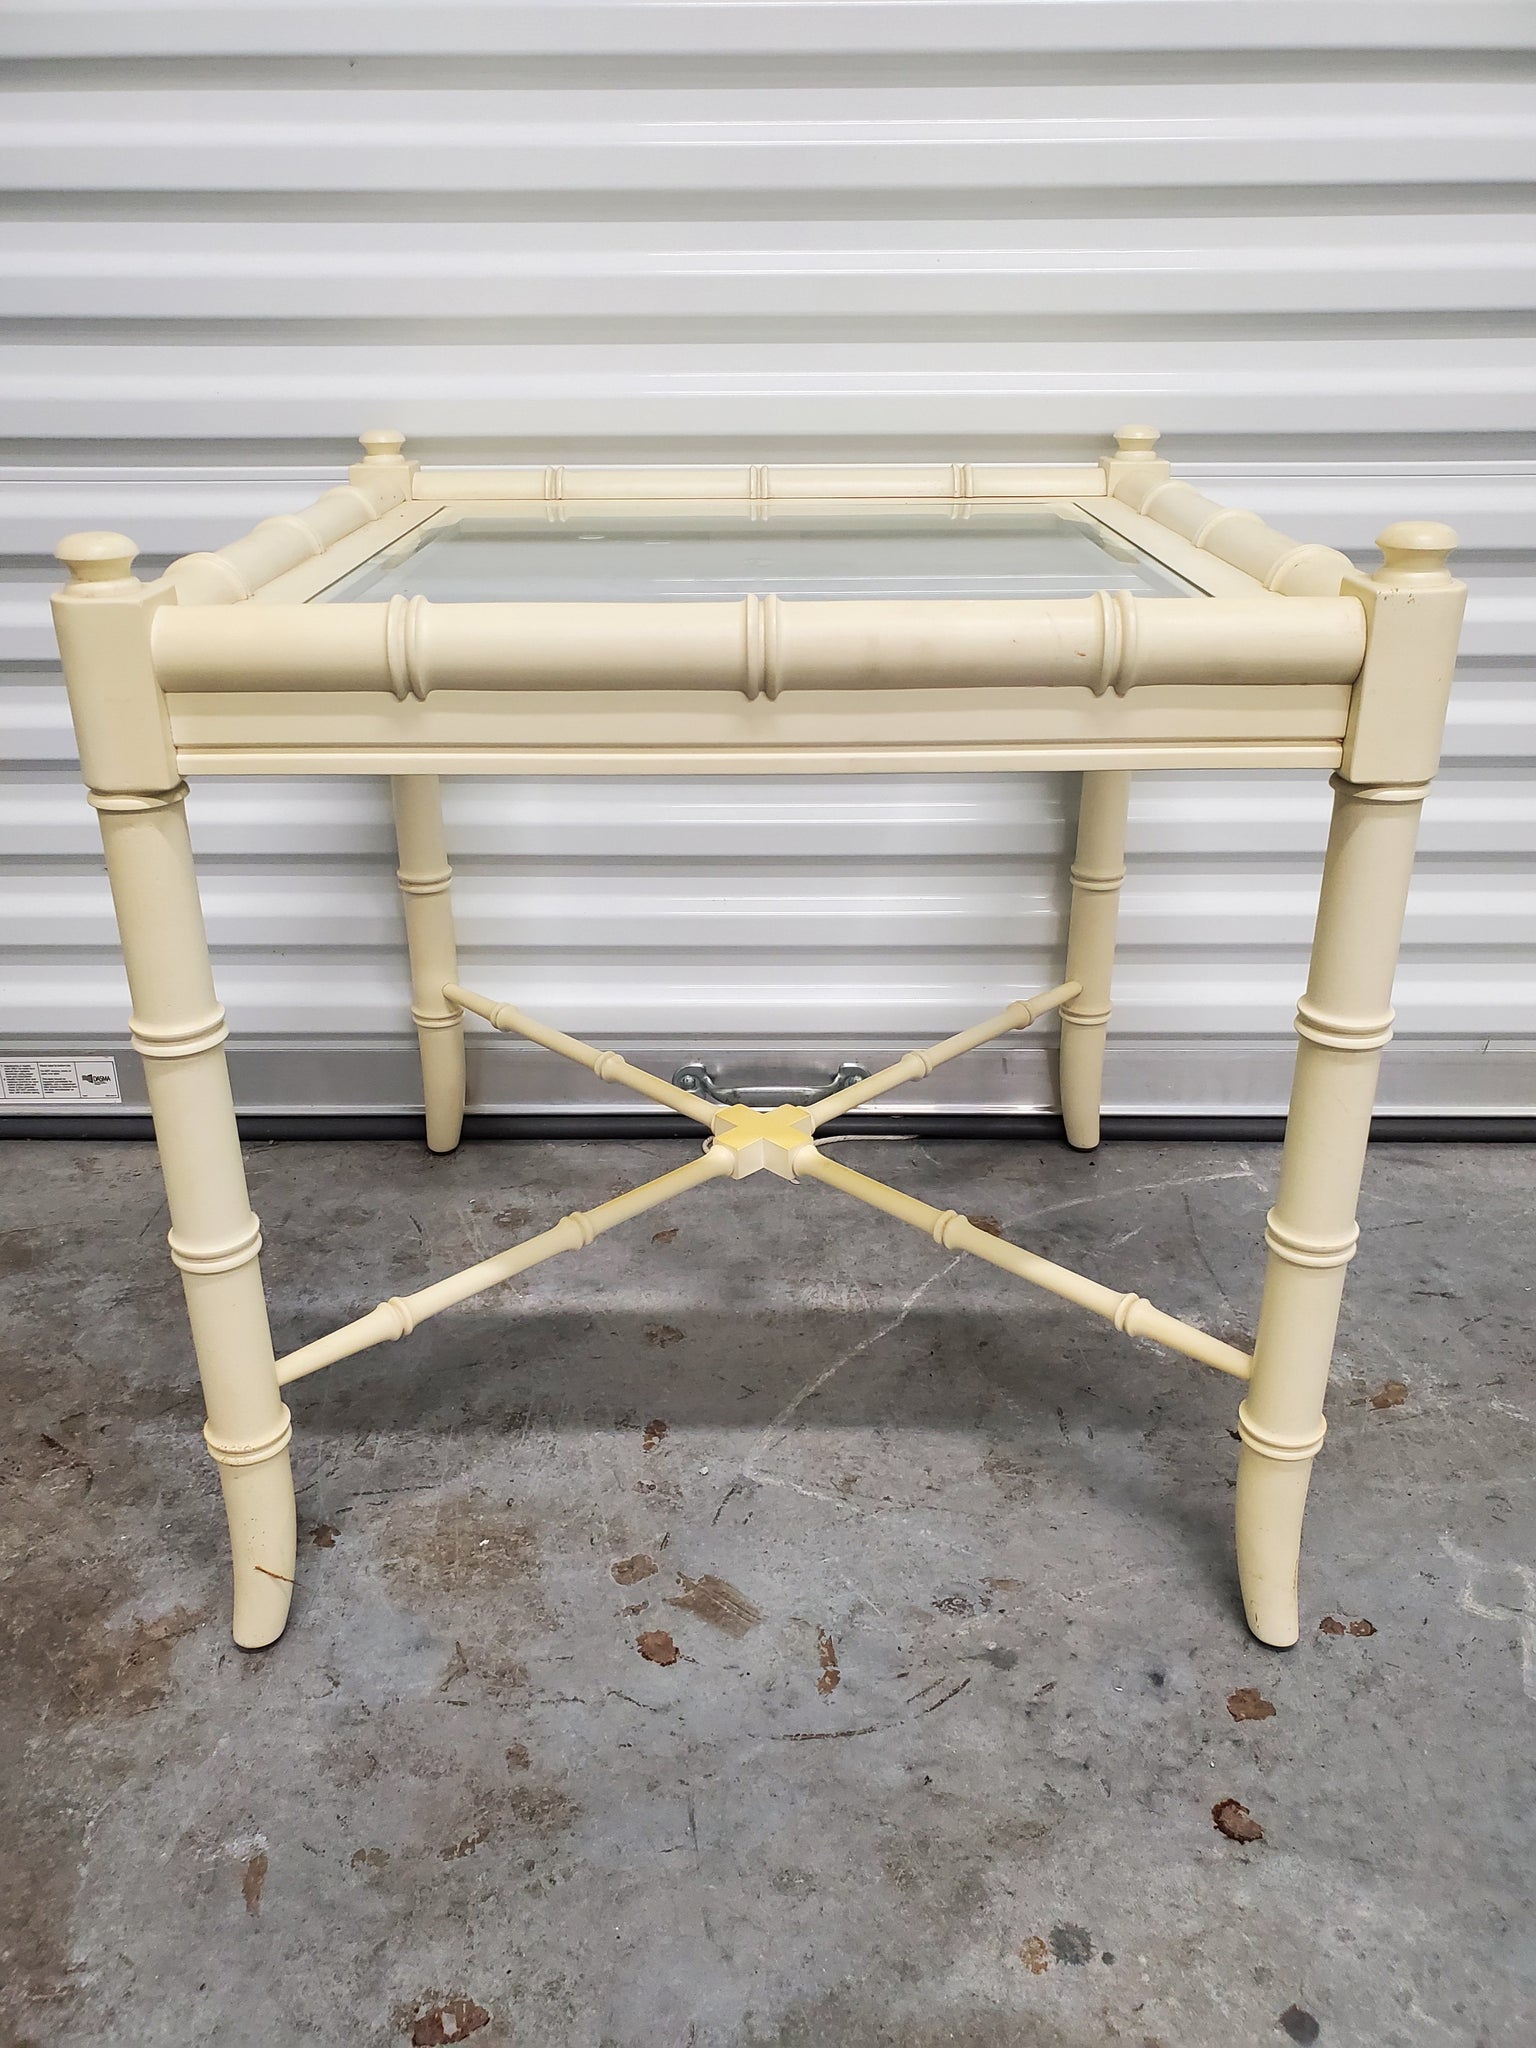 VINTAGE THOMASVILLE FAUX BAMBOO END TABLE